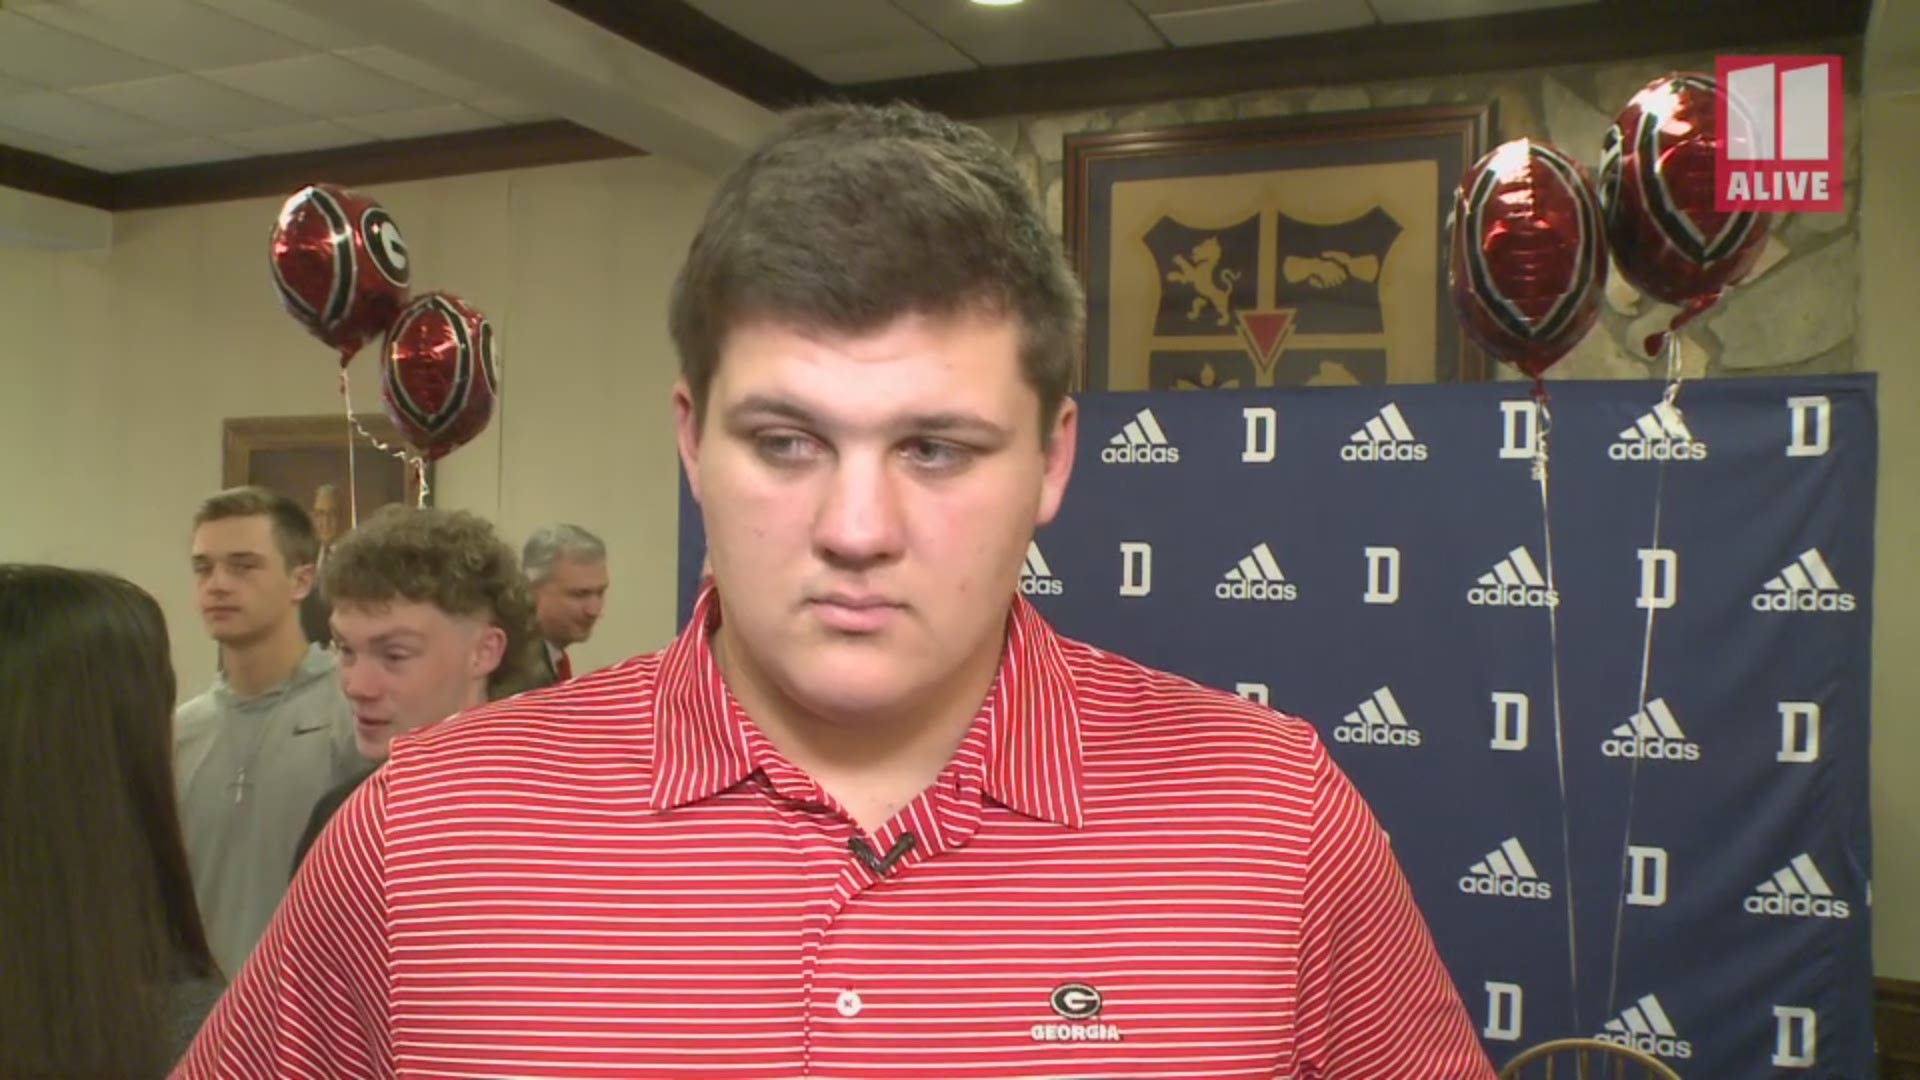 The senior offensive tackle Tate Ratledge made his commitment to the University of Georgia official, Wednesday, when he signed his letter of intent.